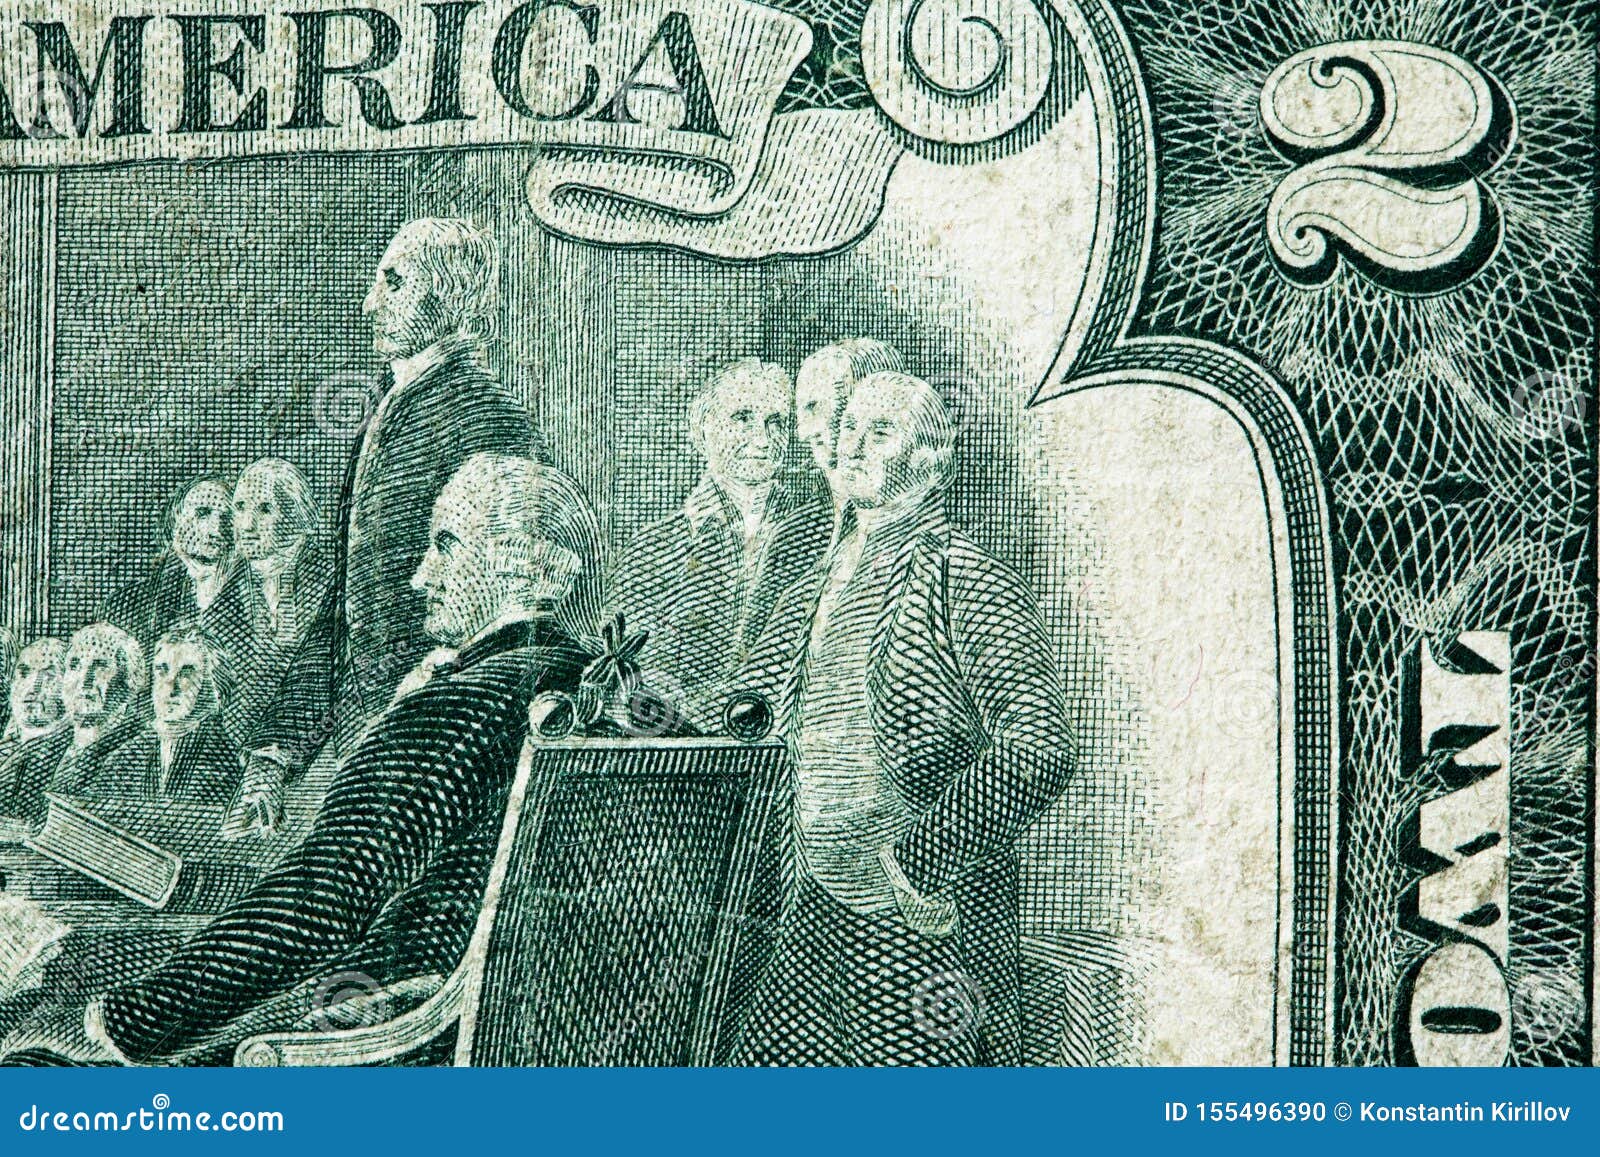 Two USA Dollar Banknote stock photo. Image of business - 155496390